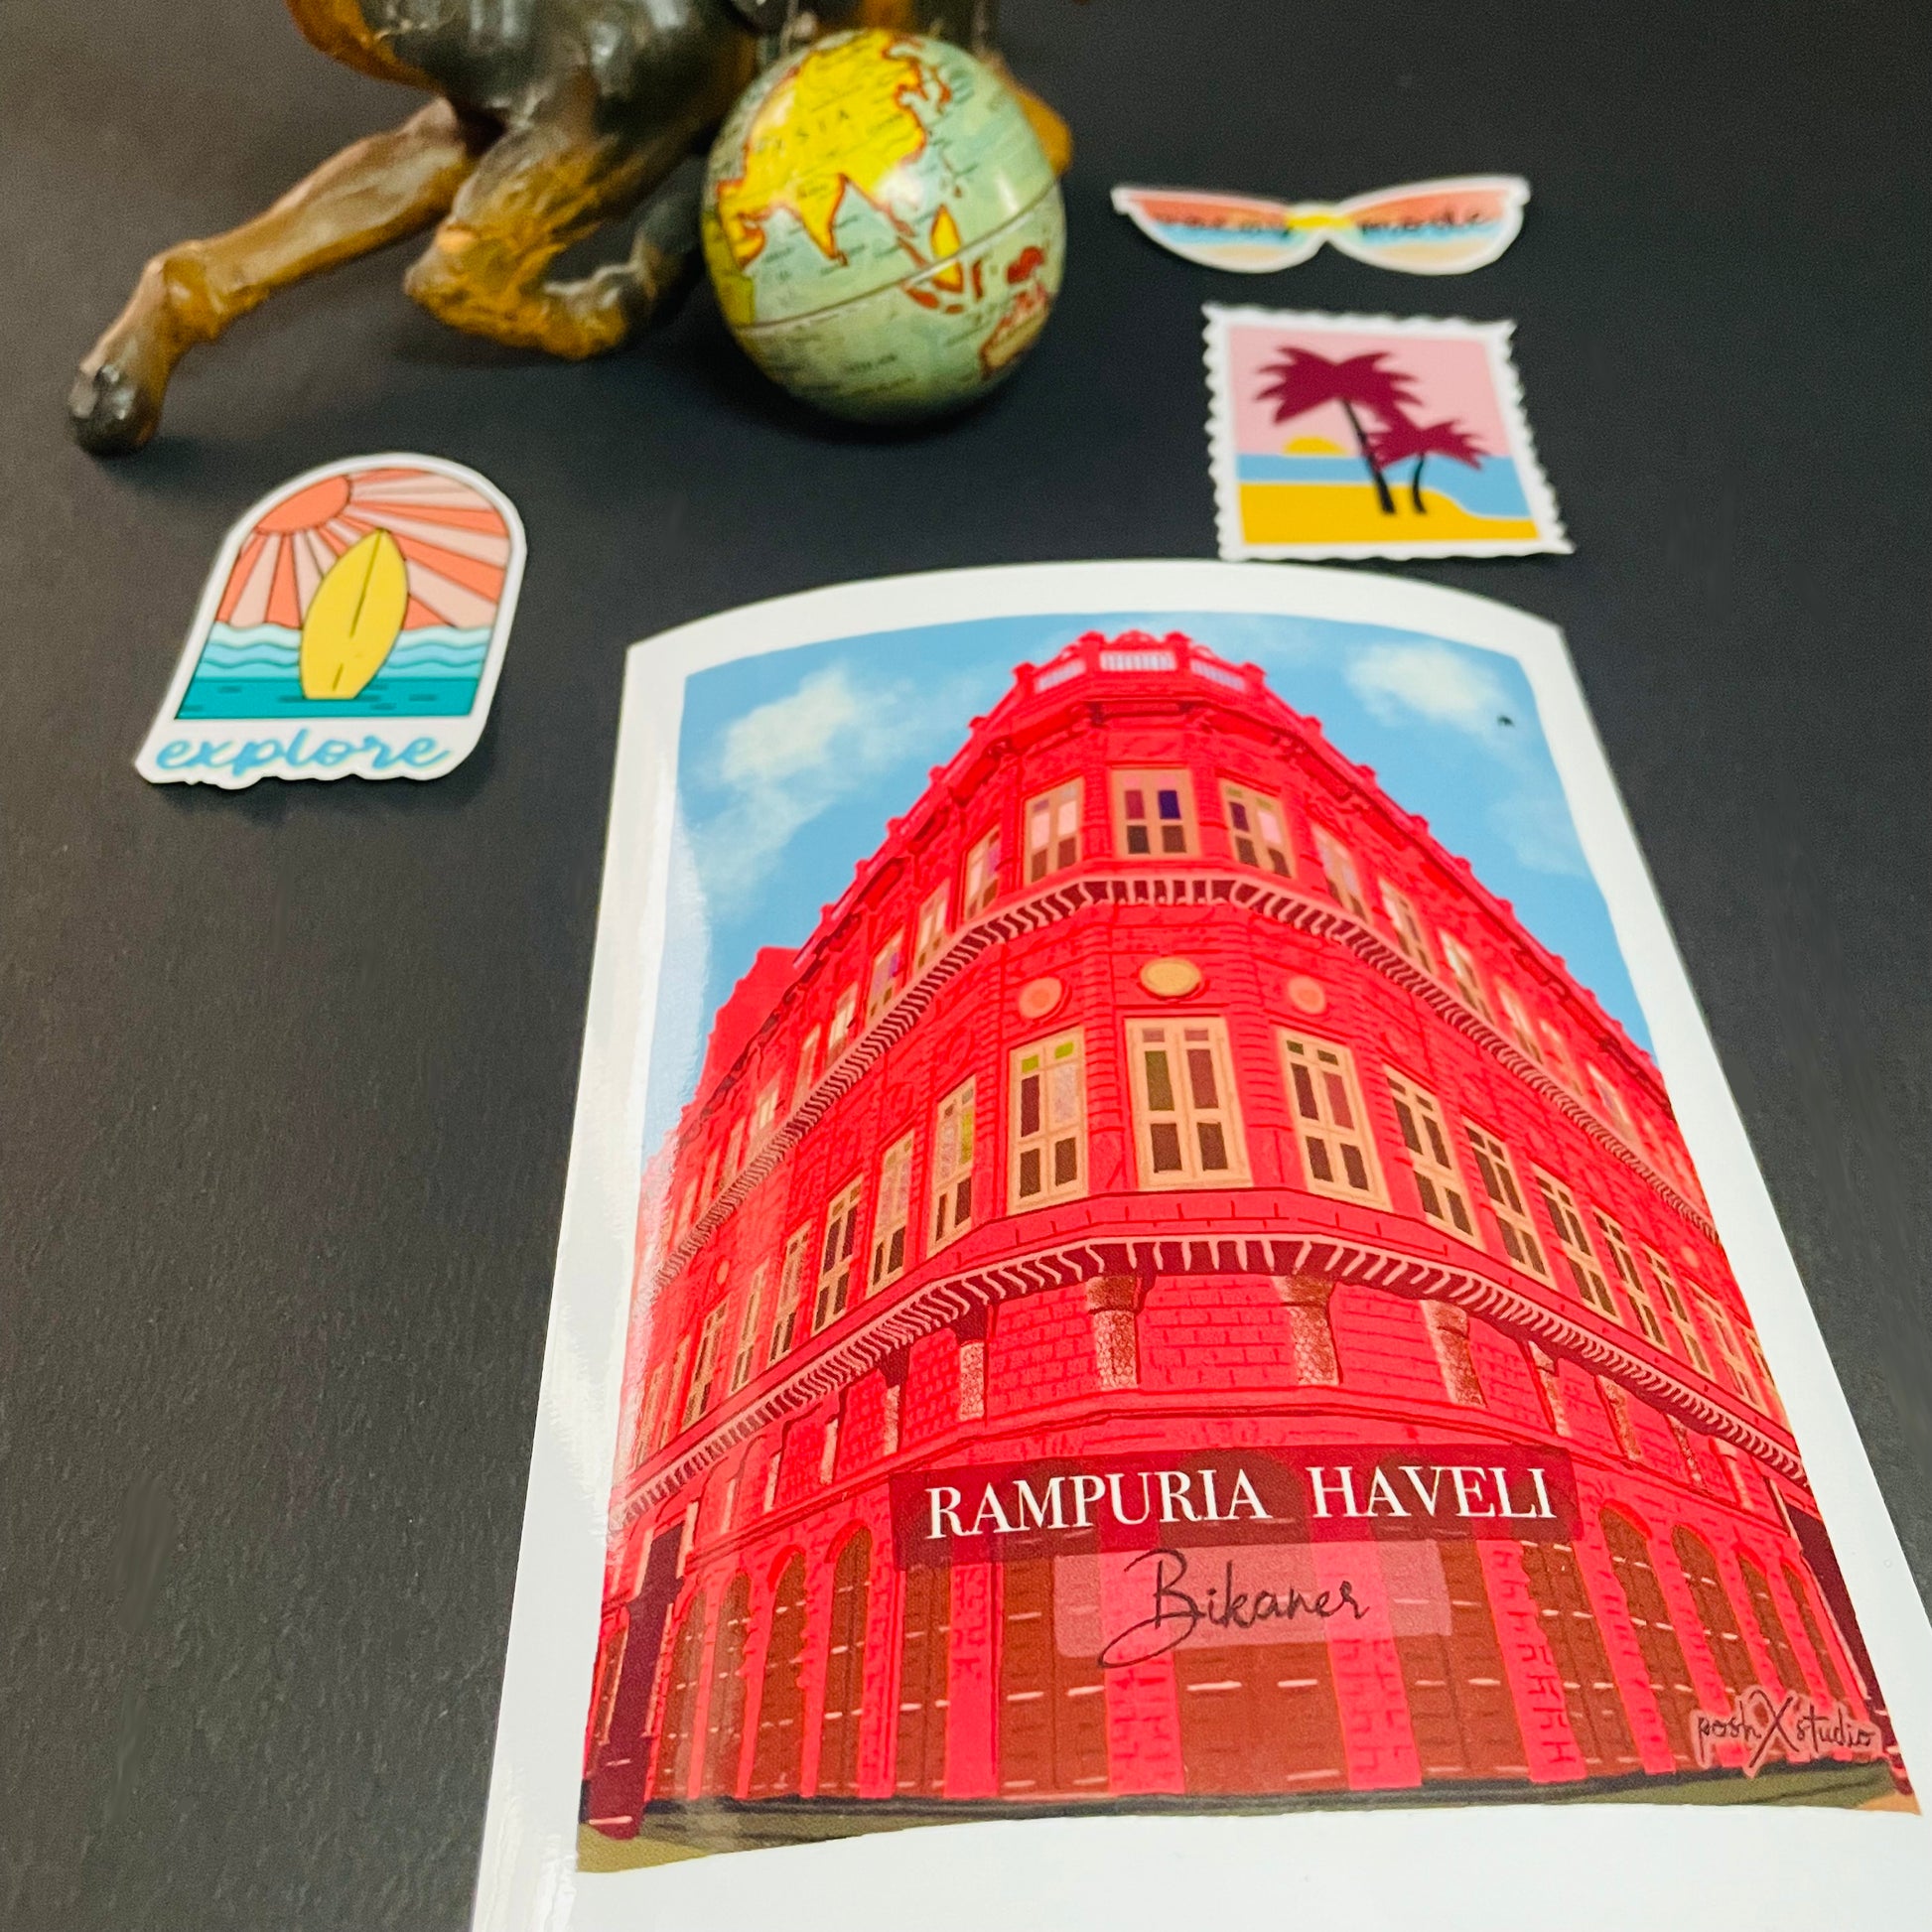 buy rampuria haveli art online bikaner travel collectibles posh the studio poshXplaces collection choti kashi bikaner heritage conservation gift store rajasthan fridge magnets photo magnet hoarder gifts family and friends memories travel lovers india trending gifts cute travel stickers india